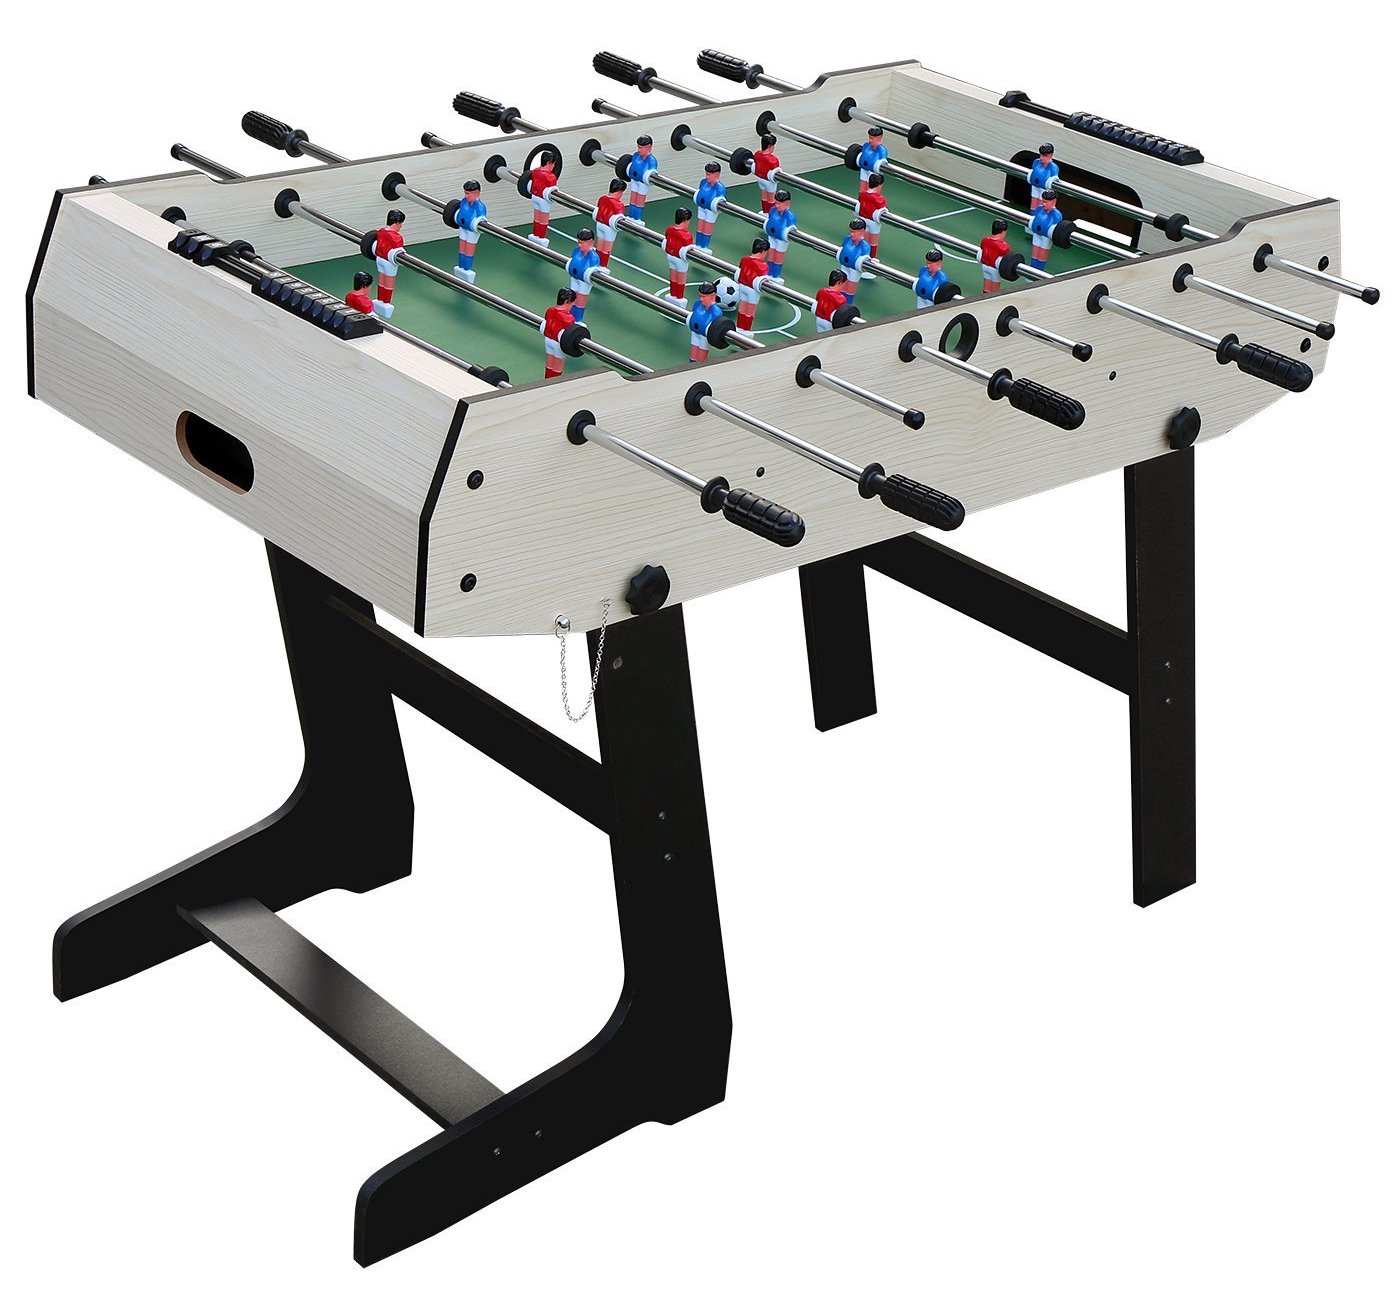 hlc 4 foot foldable soccer table image